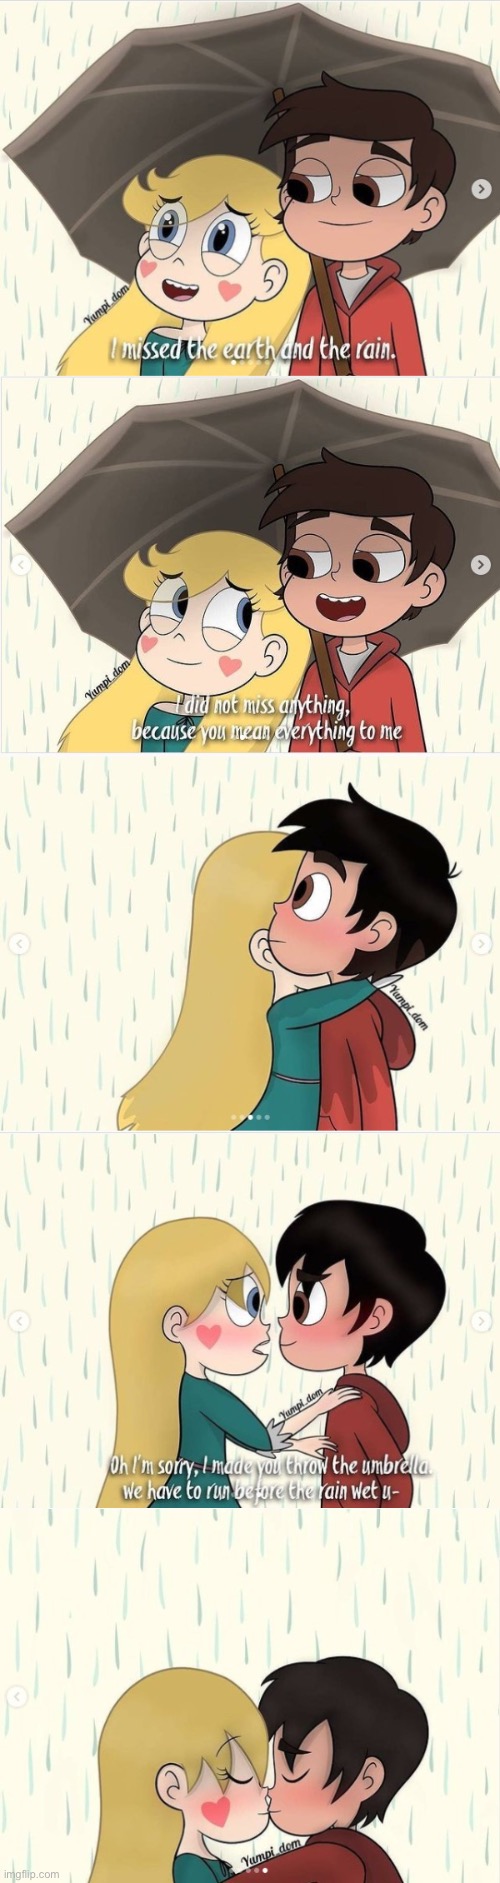 Romatic Kiss Under the rain (Comments Turned Off, I don’t want to be Comment-Bombed) | image tagged in love,svtfoe,comics/cartoons,star vs the forces of evil,comics,memes | made w/ Imgflip meme maker